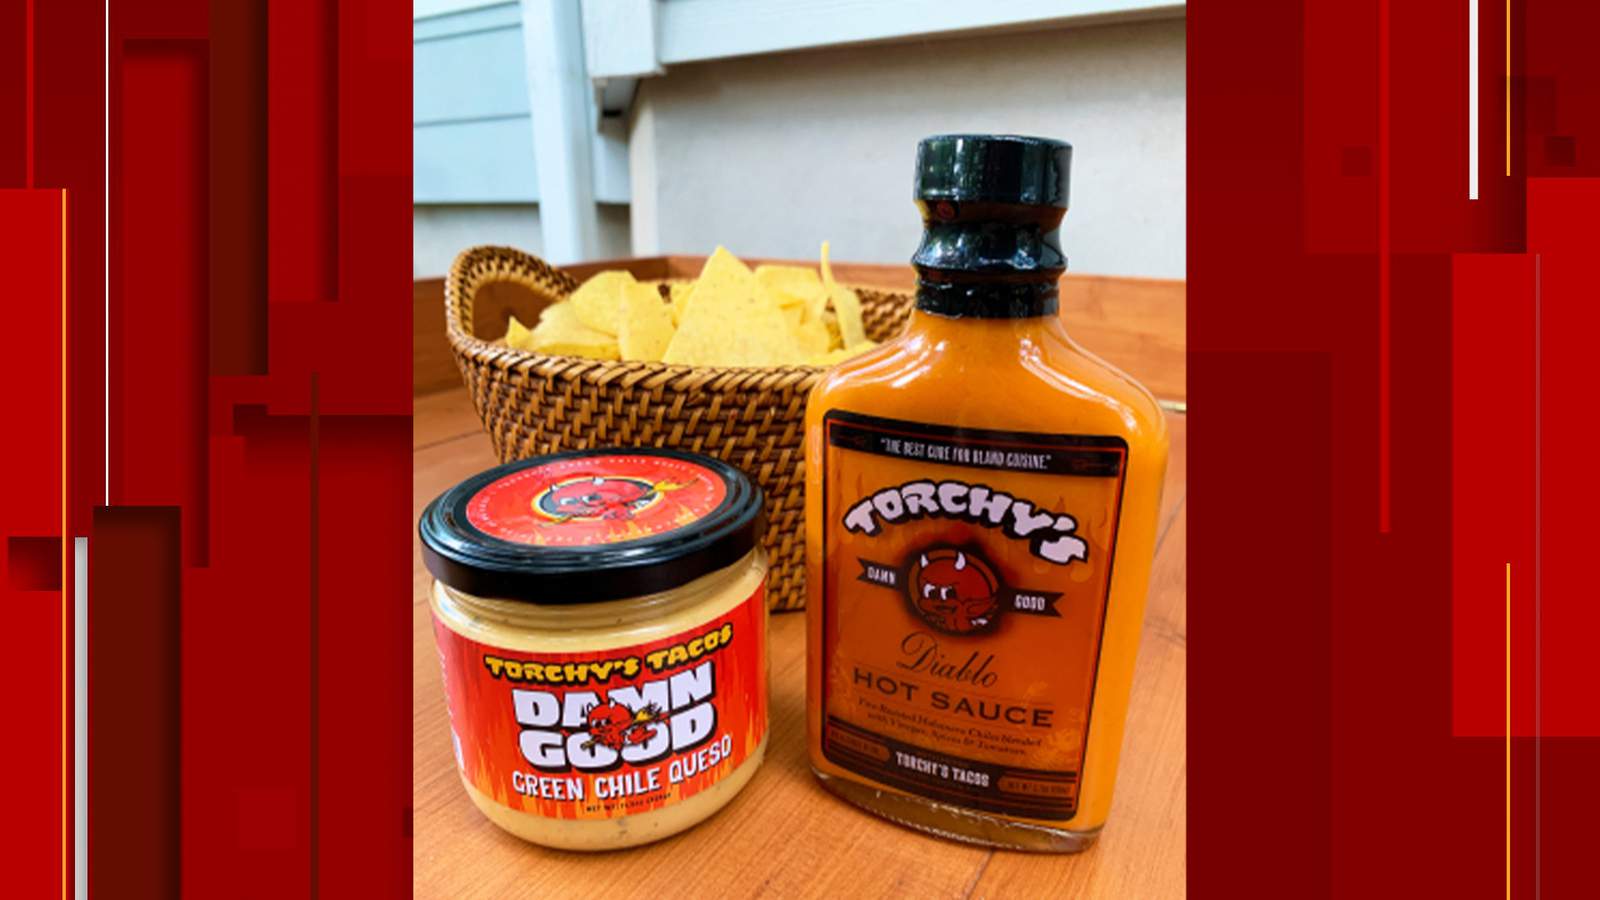 Torchy’s Tacos queso, diablo hot sauce now sold at Whole Foods in San Antonio